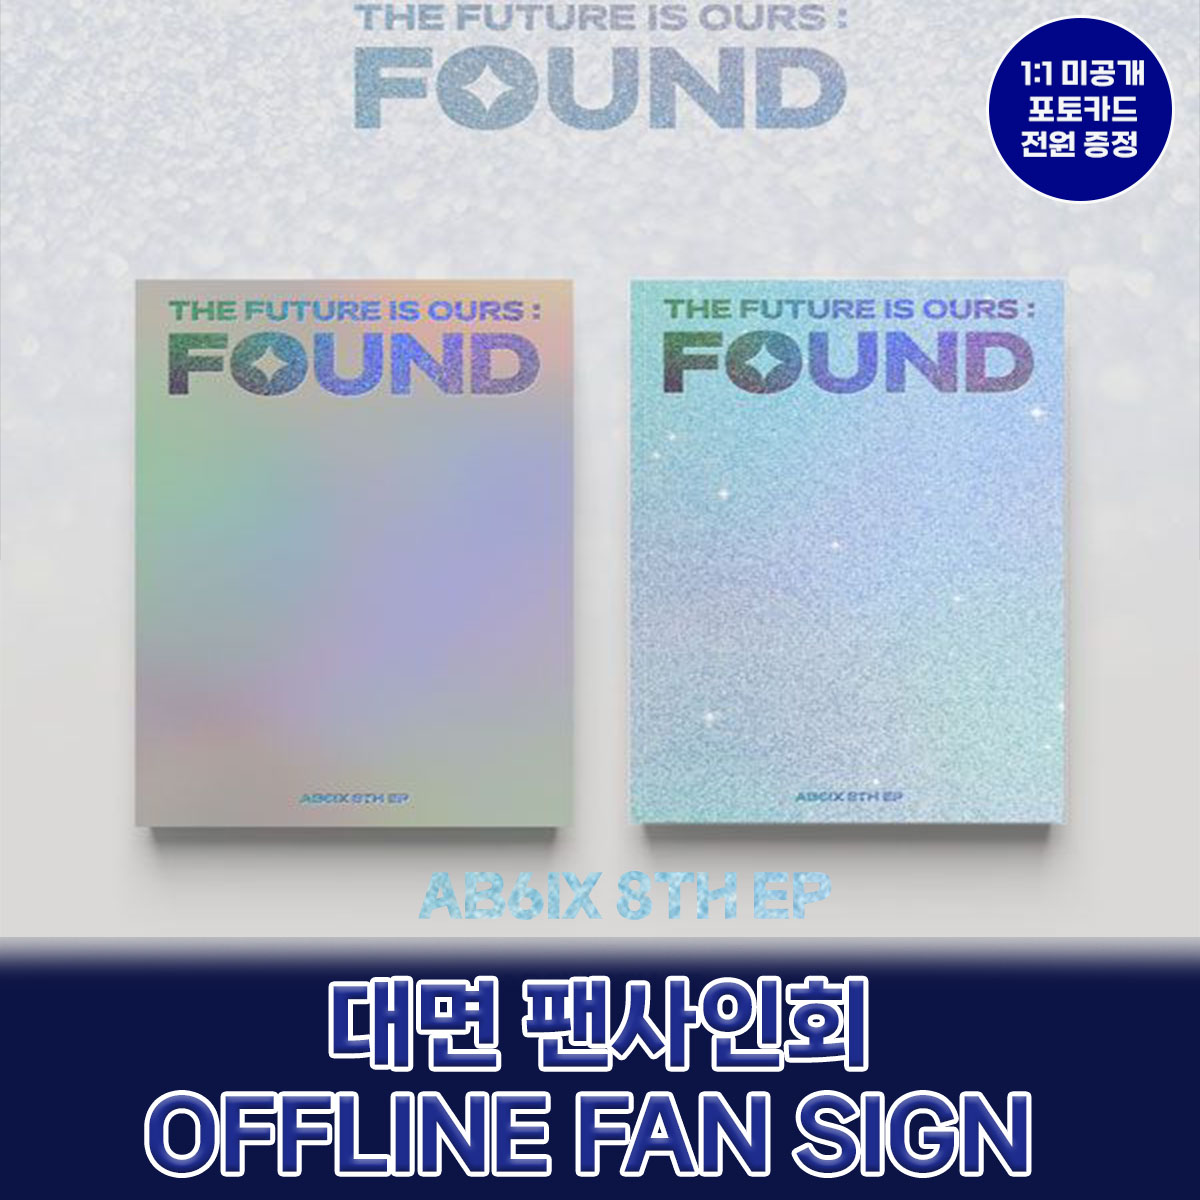 [0509] AB6IX 8TH EP Album [THE FUTURE IS OURS : FOUND]’ 대면 팬사인회